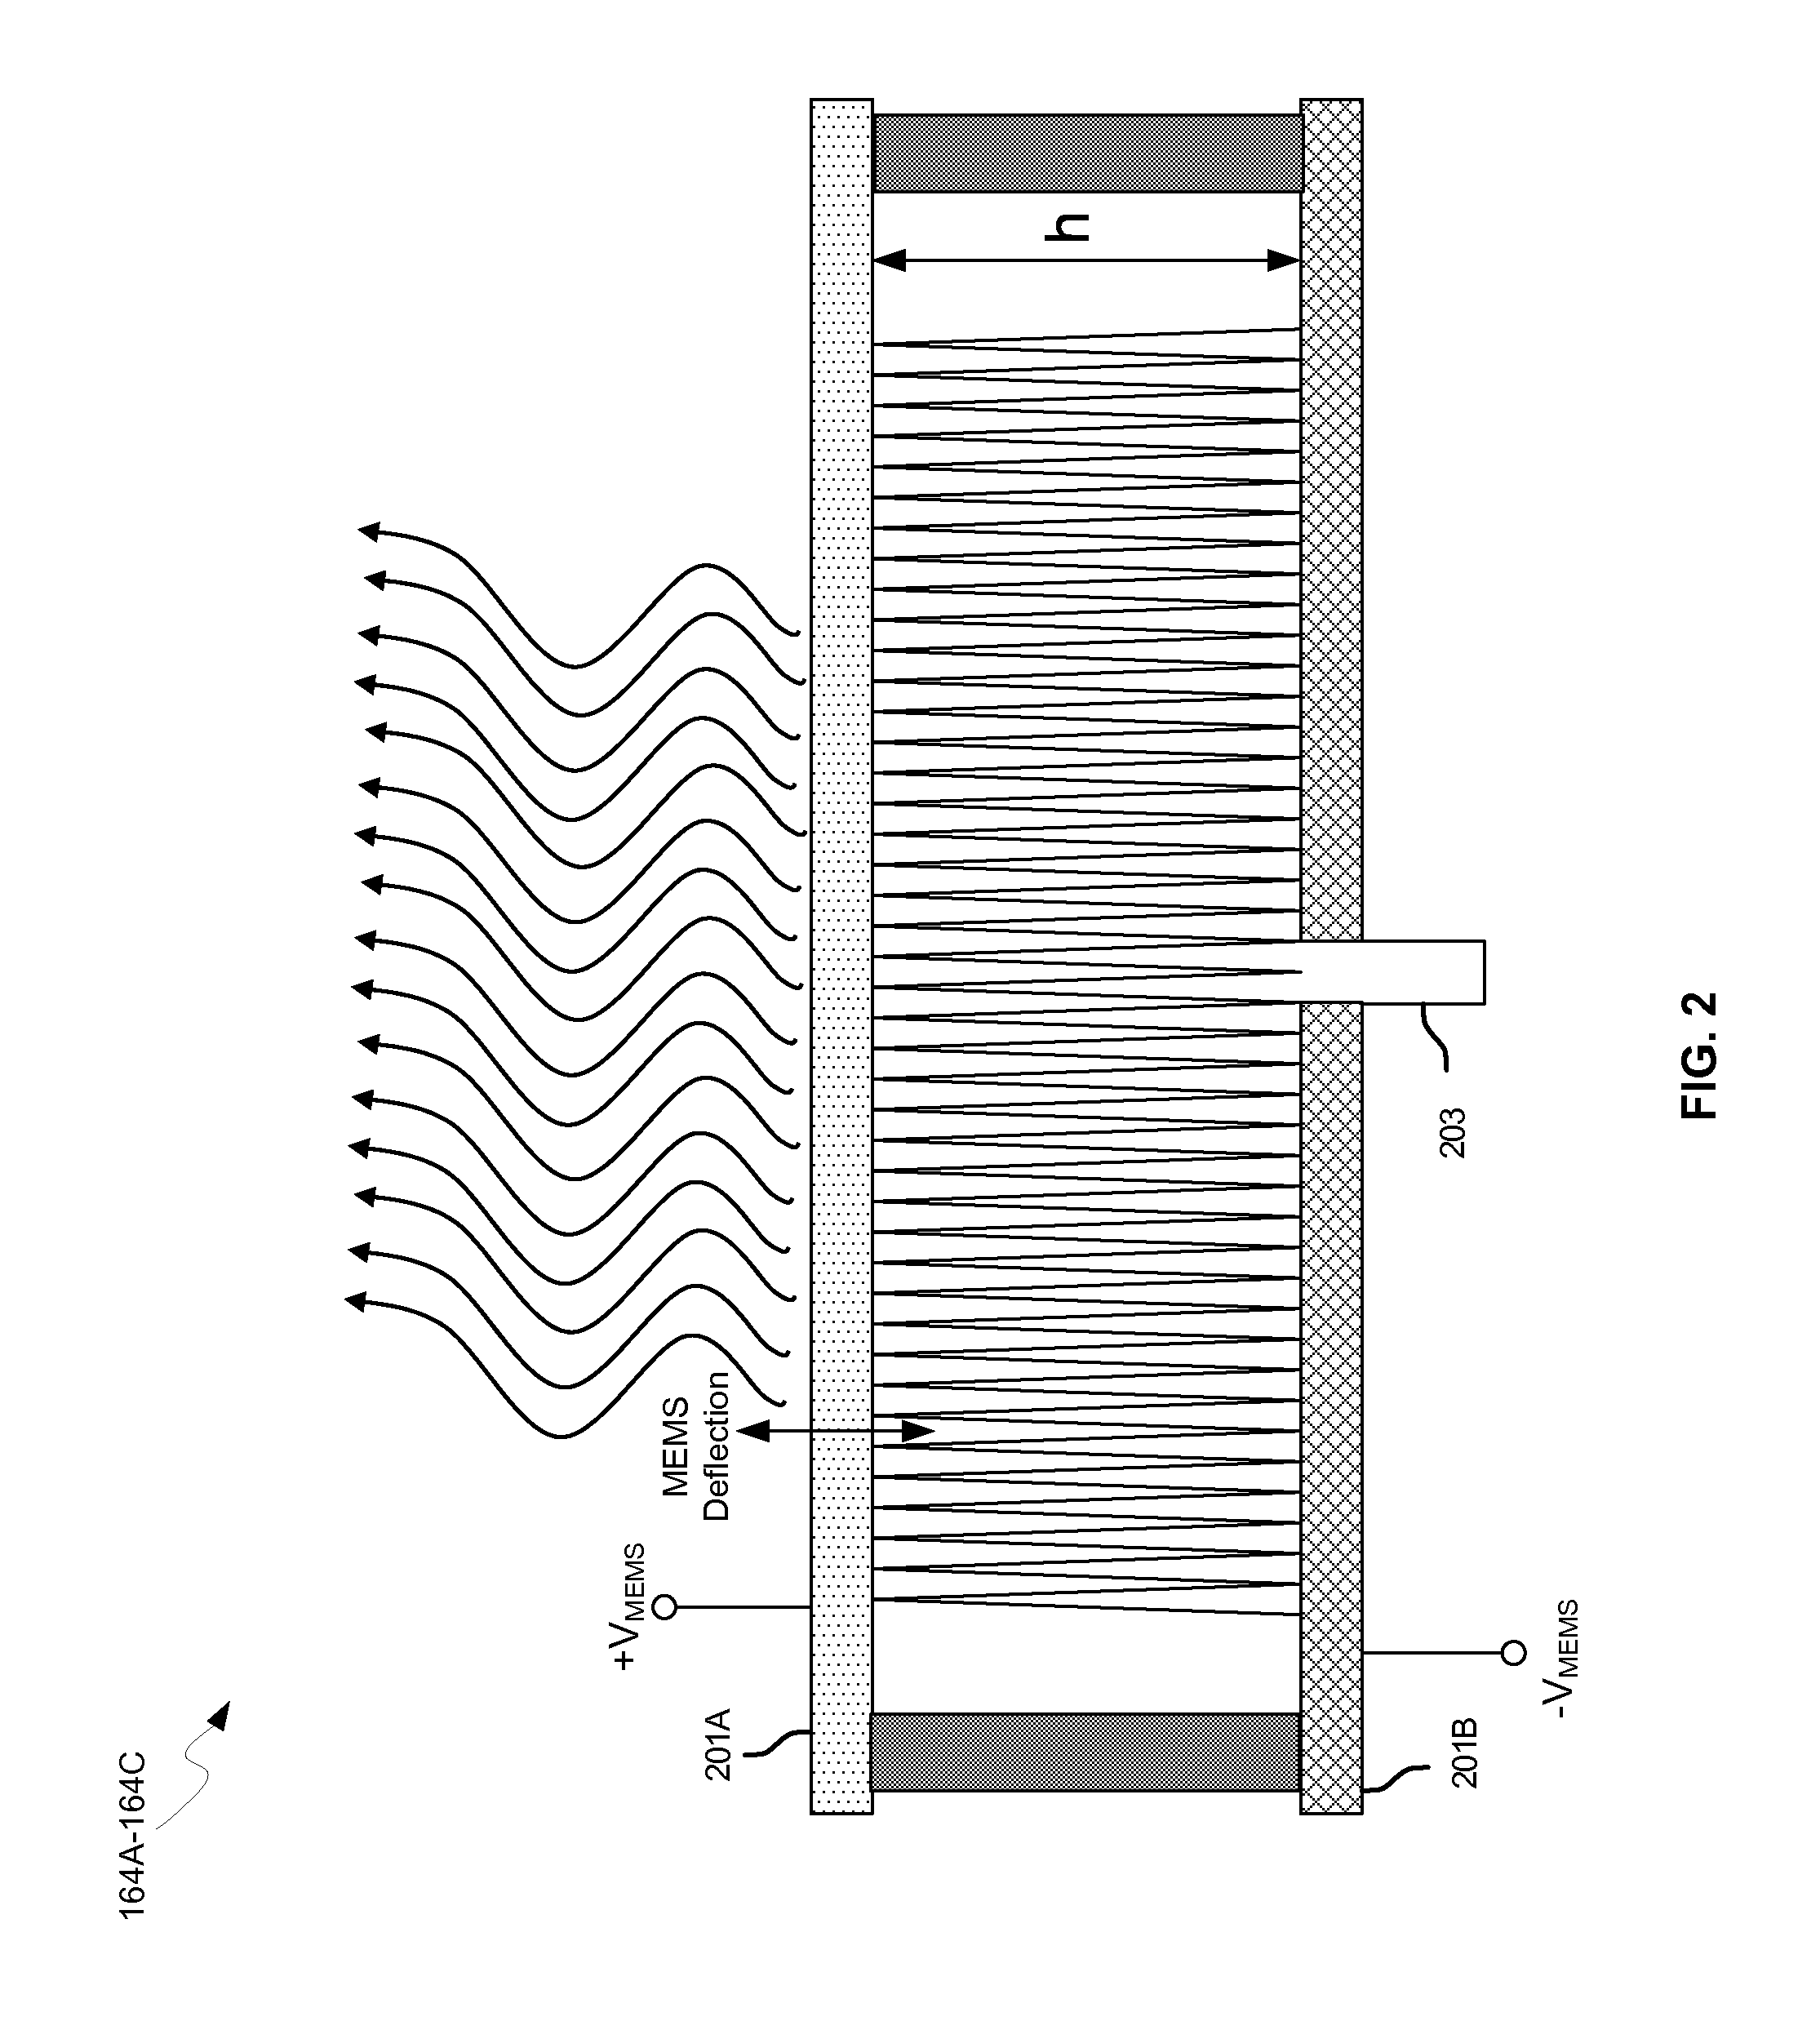 Method and system for dynamic range detection and positioning utilizing leaky wave antennas